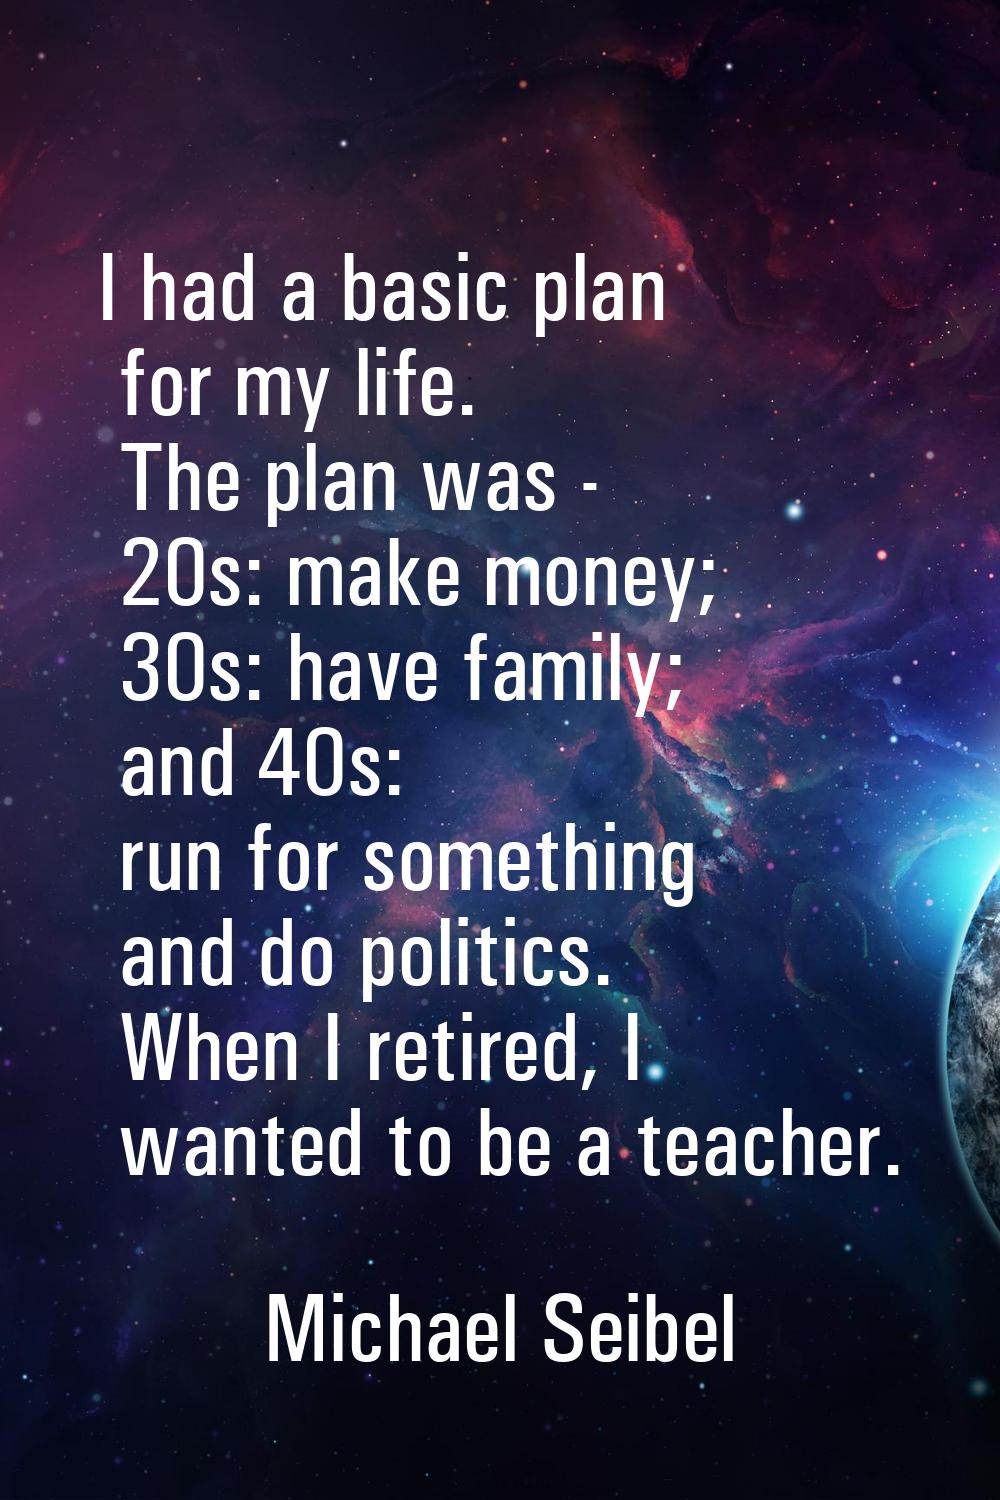 I had a basic plan for my life. The plan was - 20s: make money; 30s: have family; and 40s: run for 